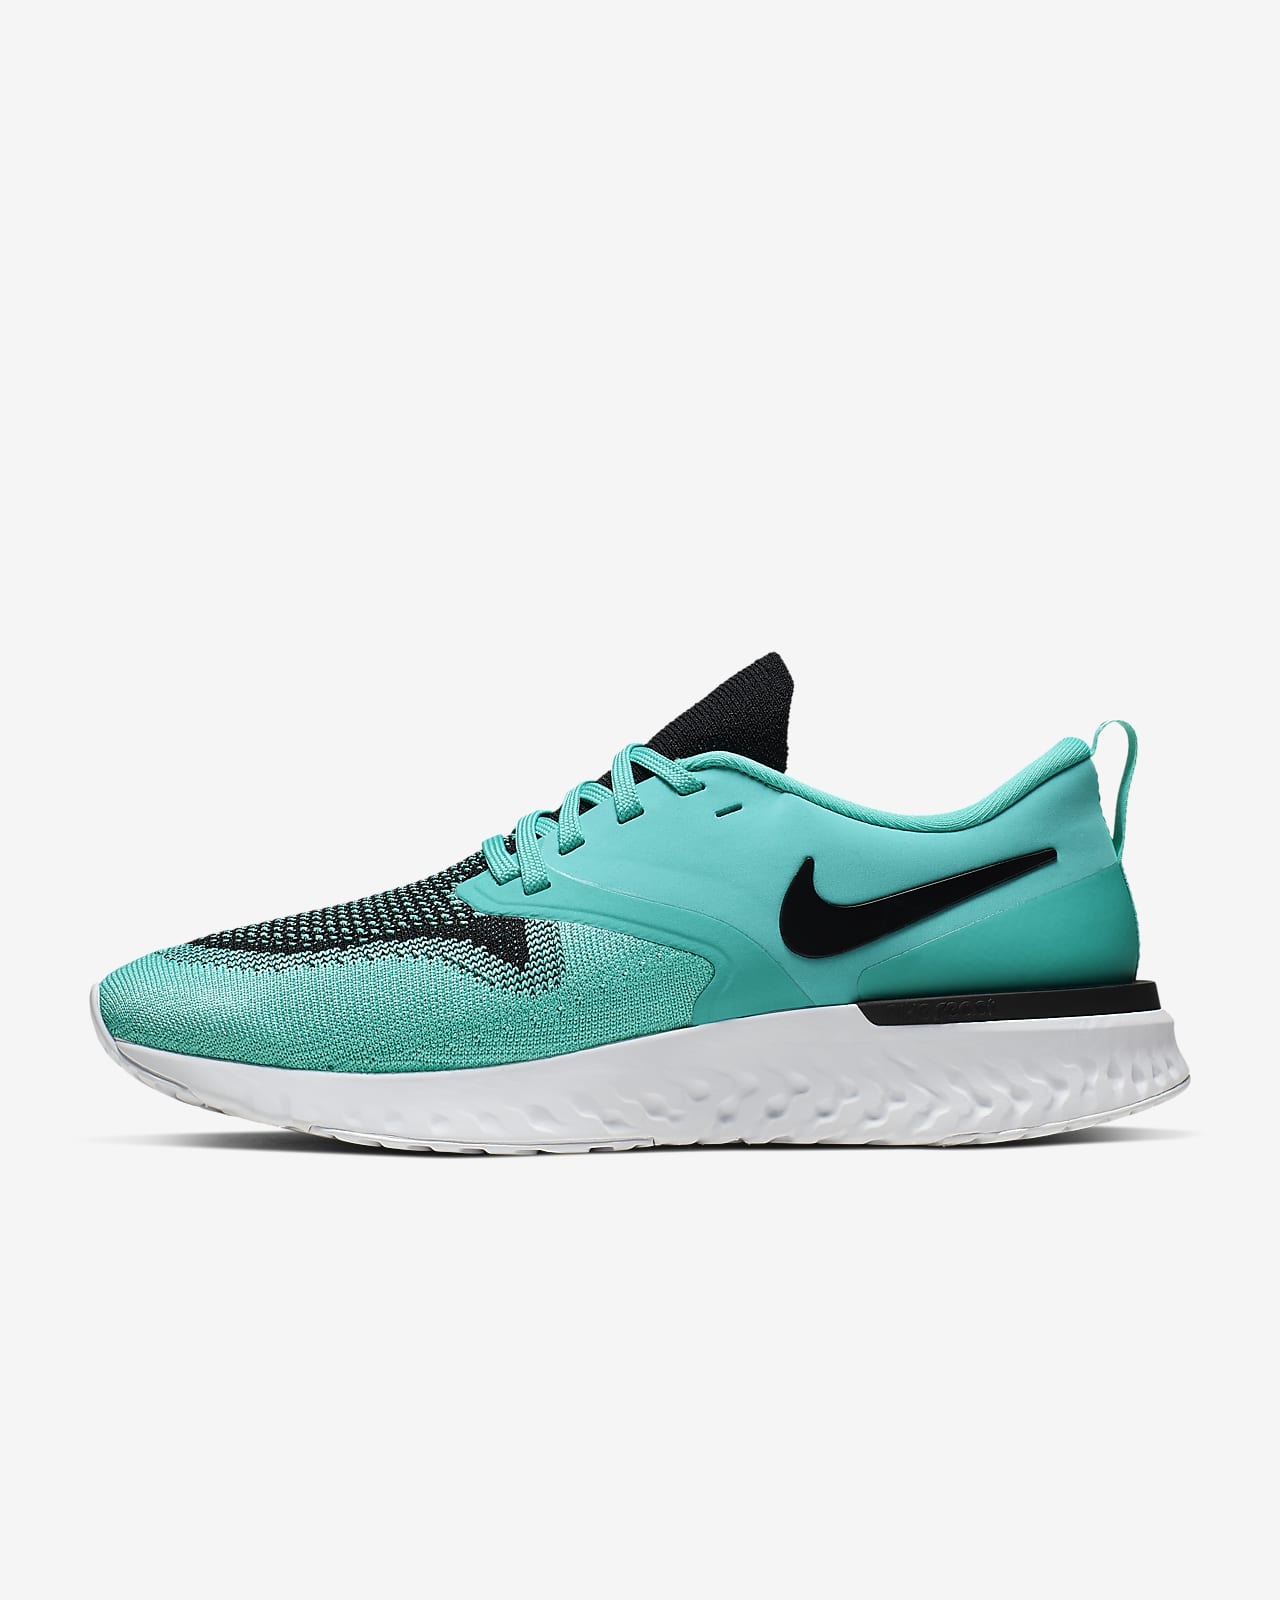 teal nike running shoes